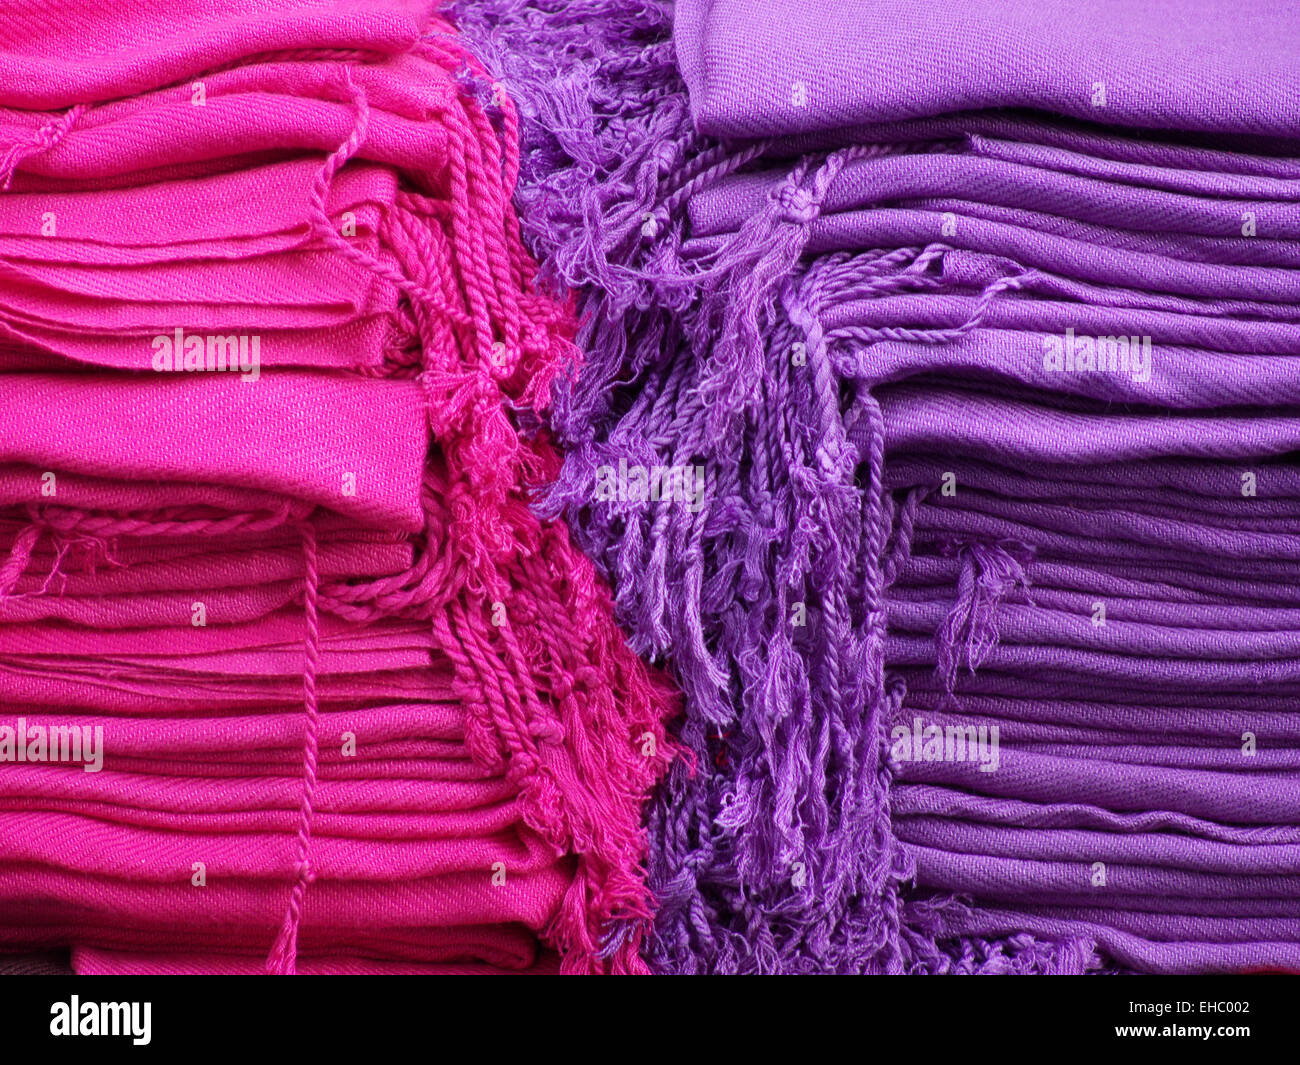 Lilac and pink shawls Stock Photo